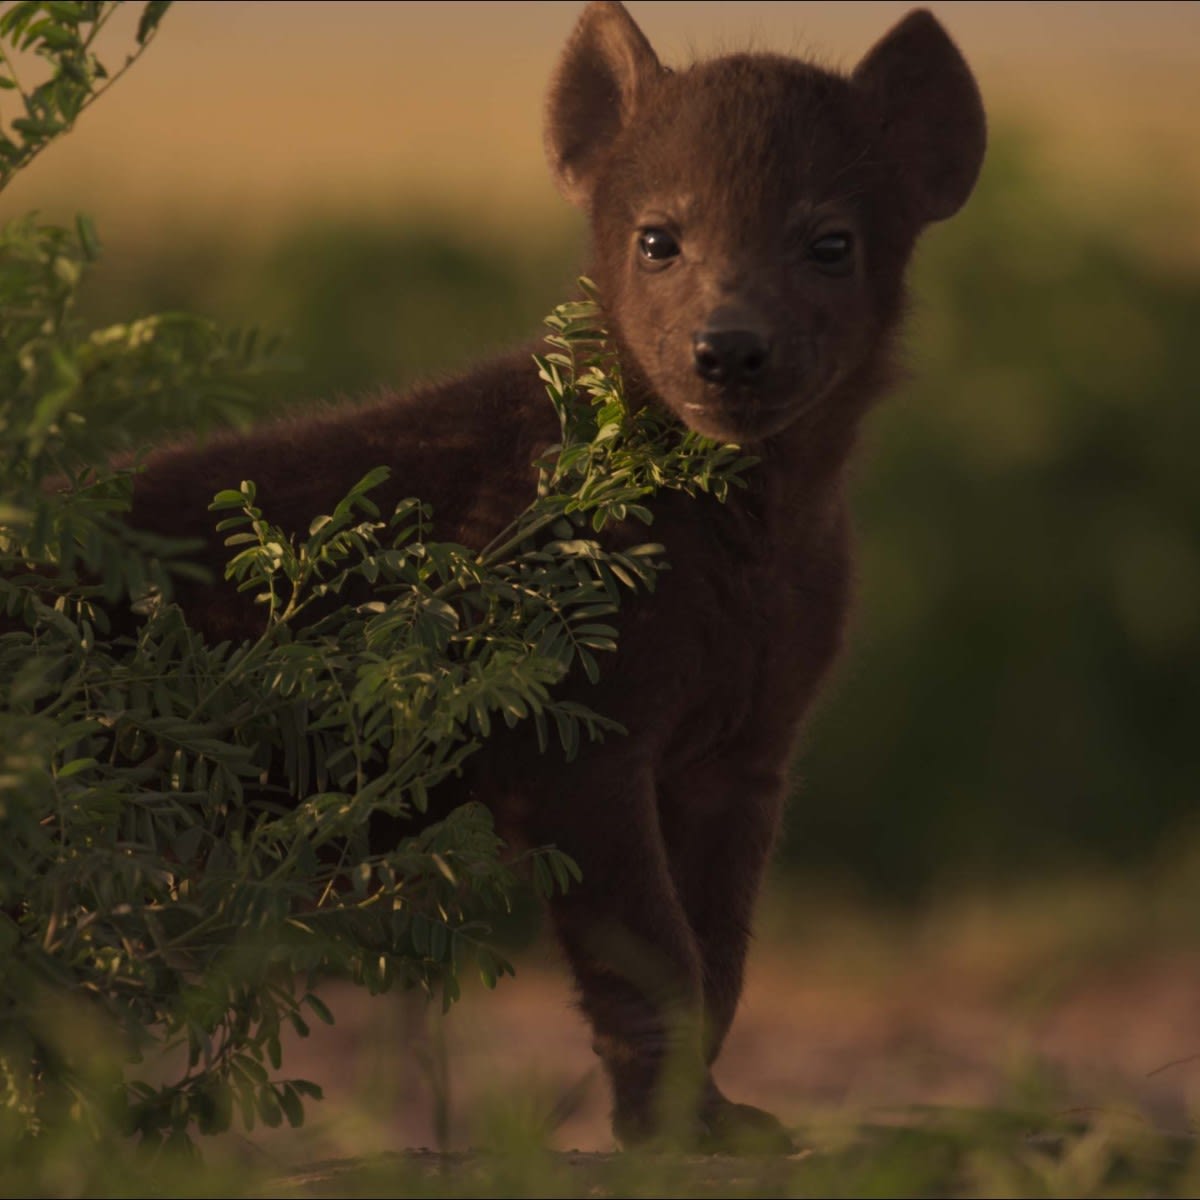 Female spotted hyenas give birth to one or two cubs per year. When the cubs mature, males will leave the clan while females will stay. Delve into the secret lives of animals fighting for their family’s survival. Find out more about Dynasties II 👉https://t.co/BhyOC5y